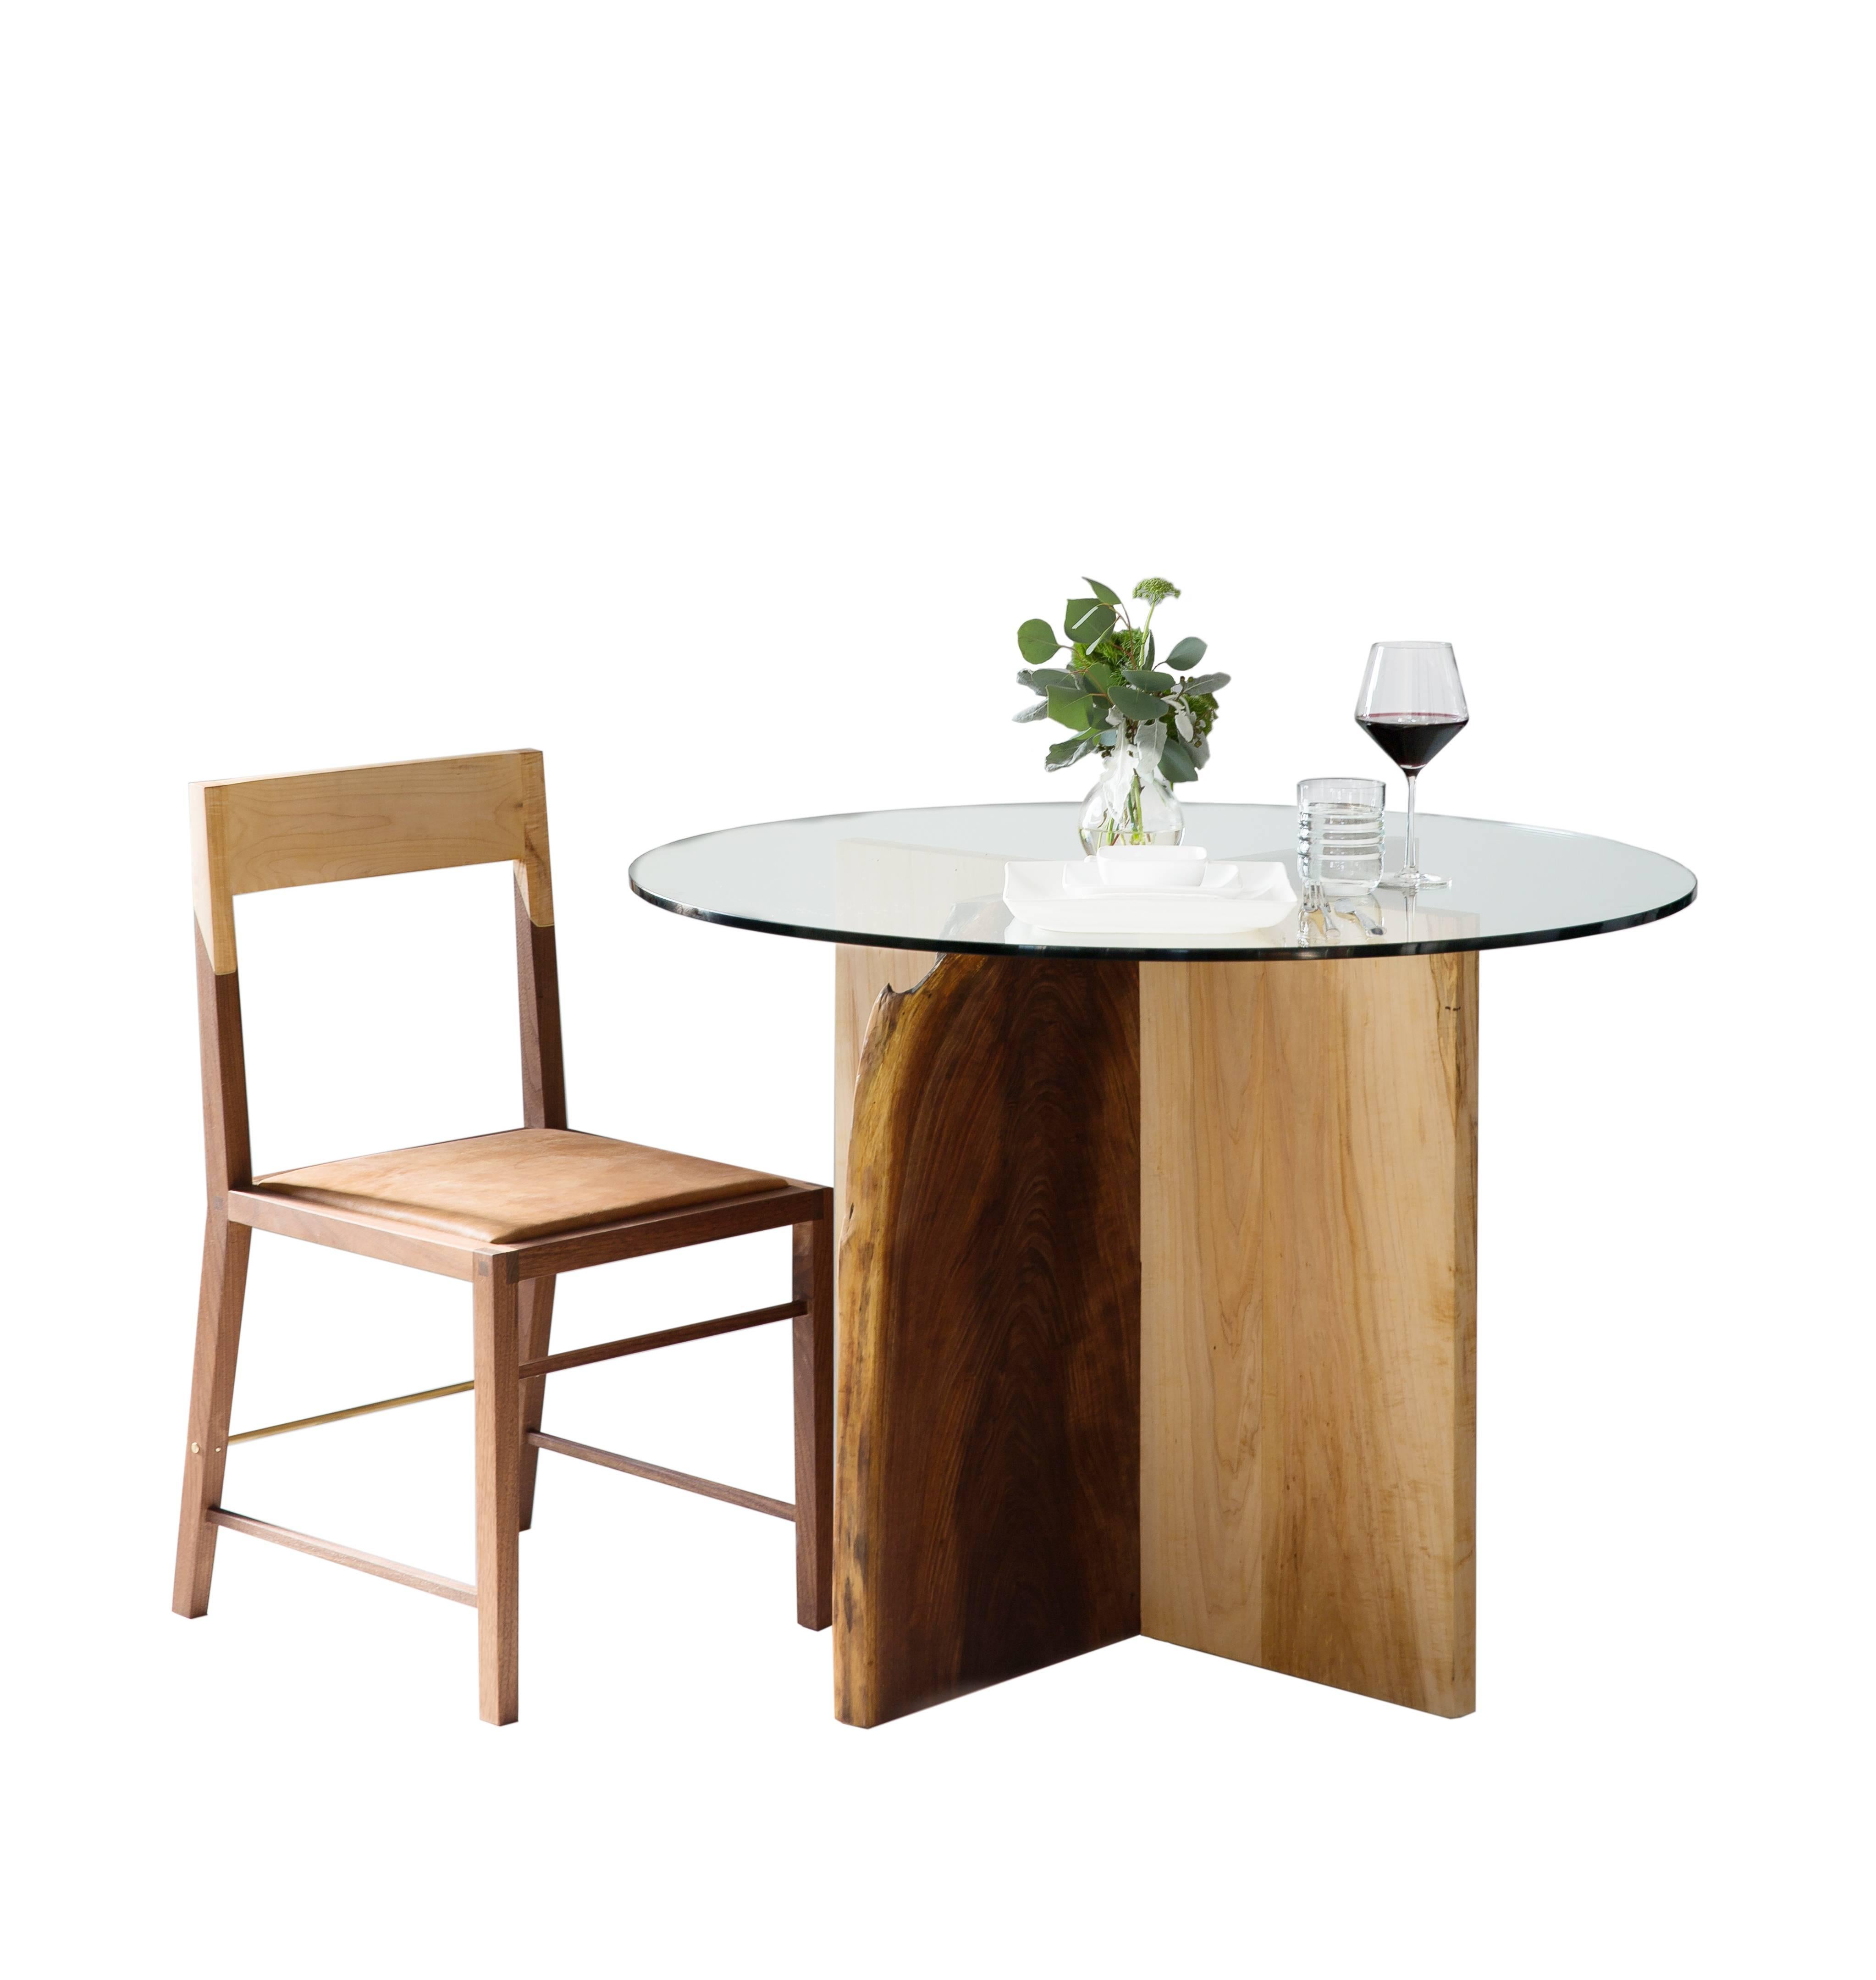 Natural edge intersected wood slab dining table base. Fine metal Dutchman joint. Polished glass top. Handmade in Los Angeles, California.

Here shown in walnut and maple with a brass Dutchman Joint, and a clear tempered glass top.

Wood base is